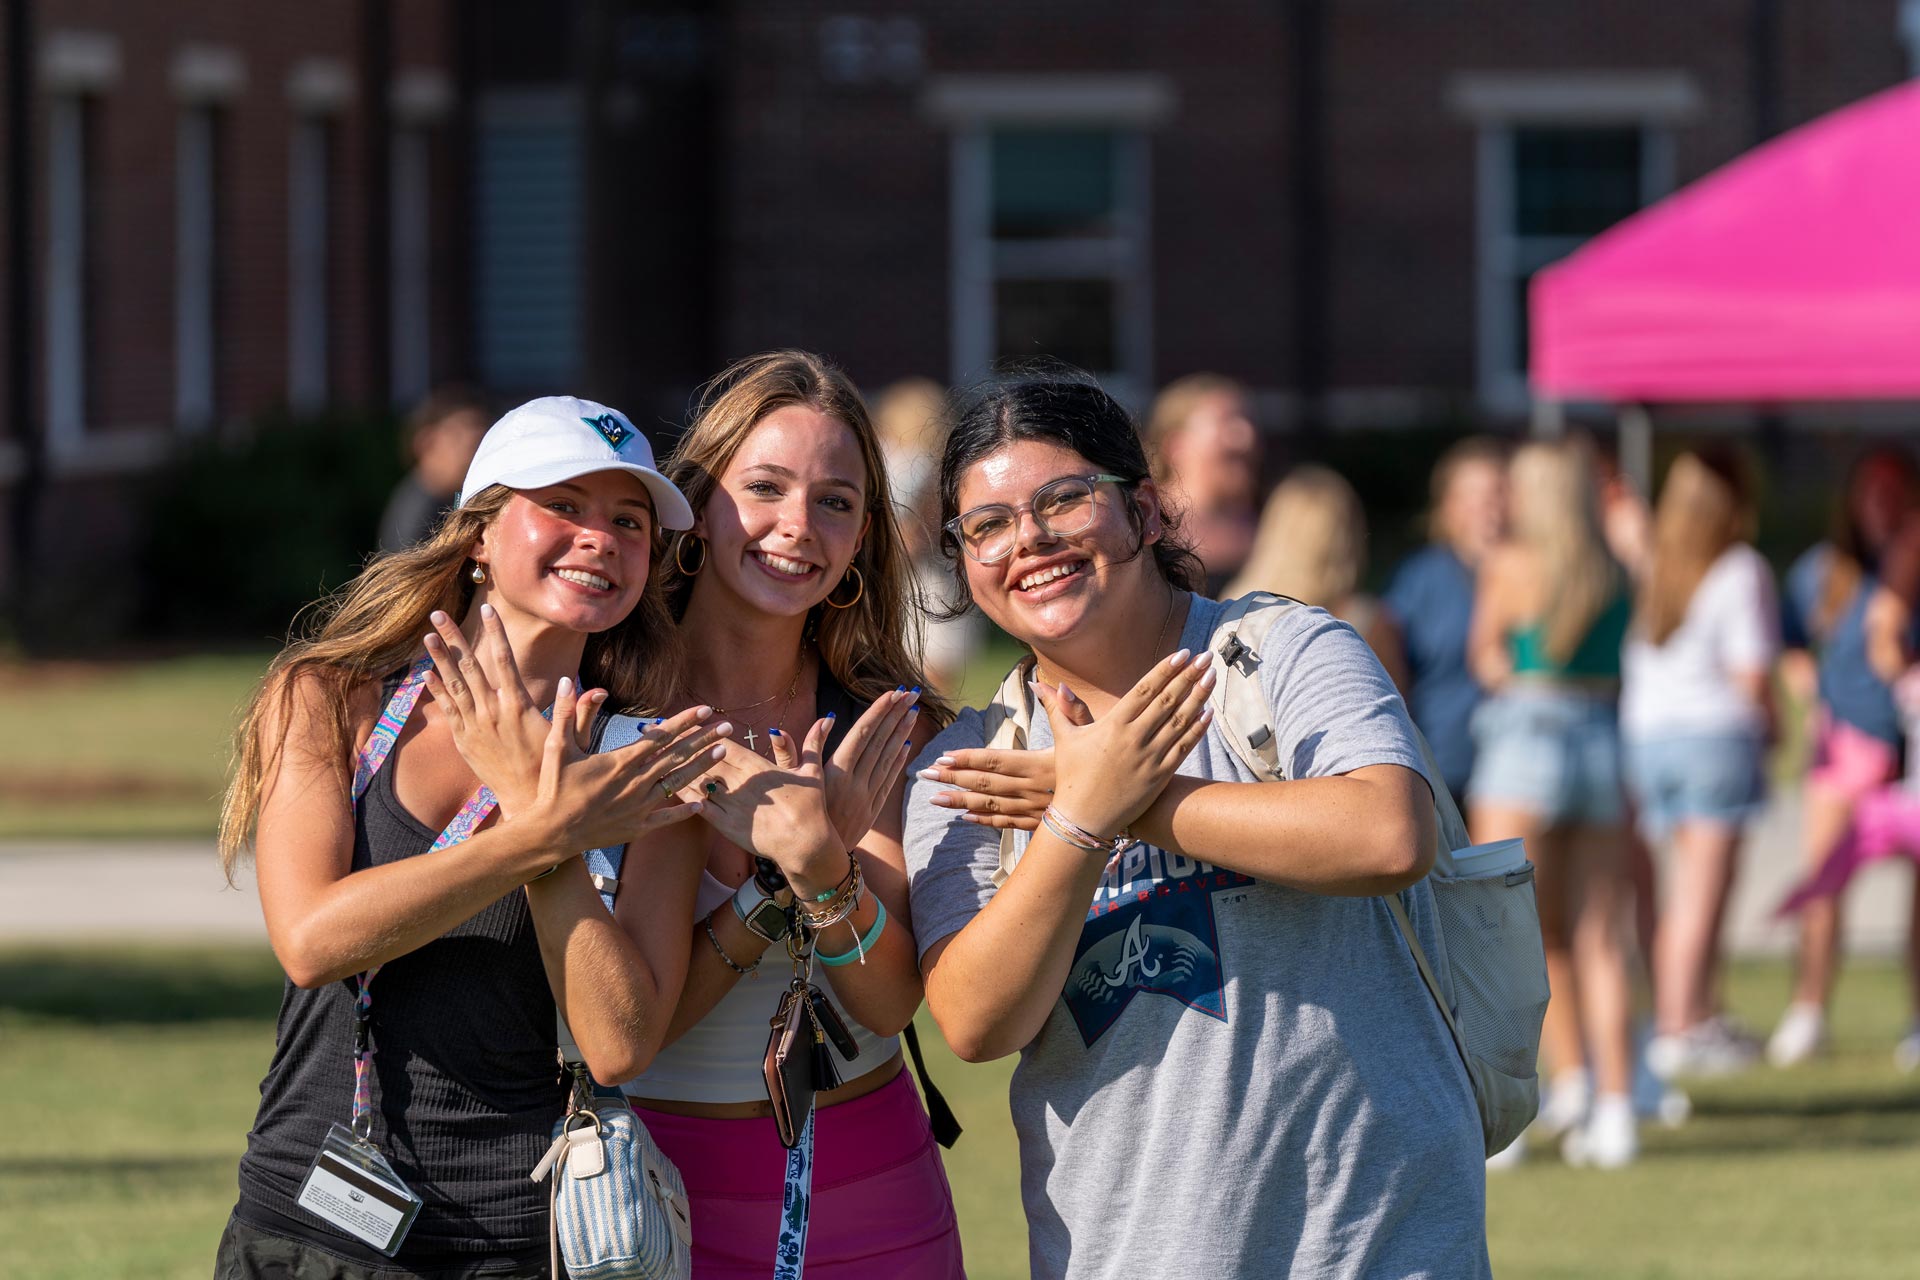 Students posing with Wings Up salute at Fraternity and Sorority Life block party